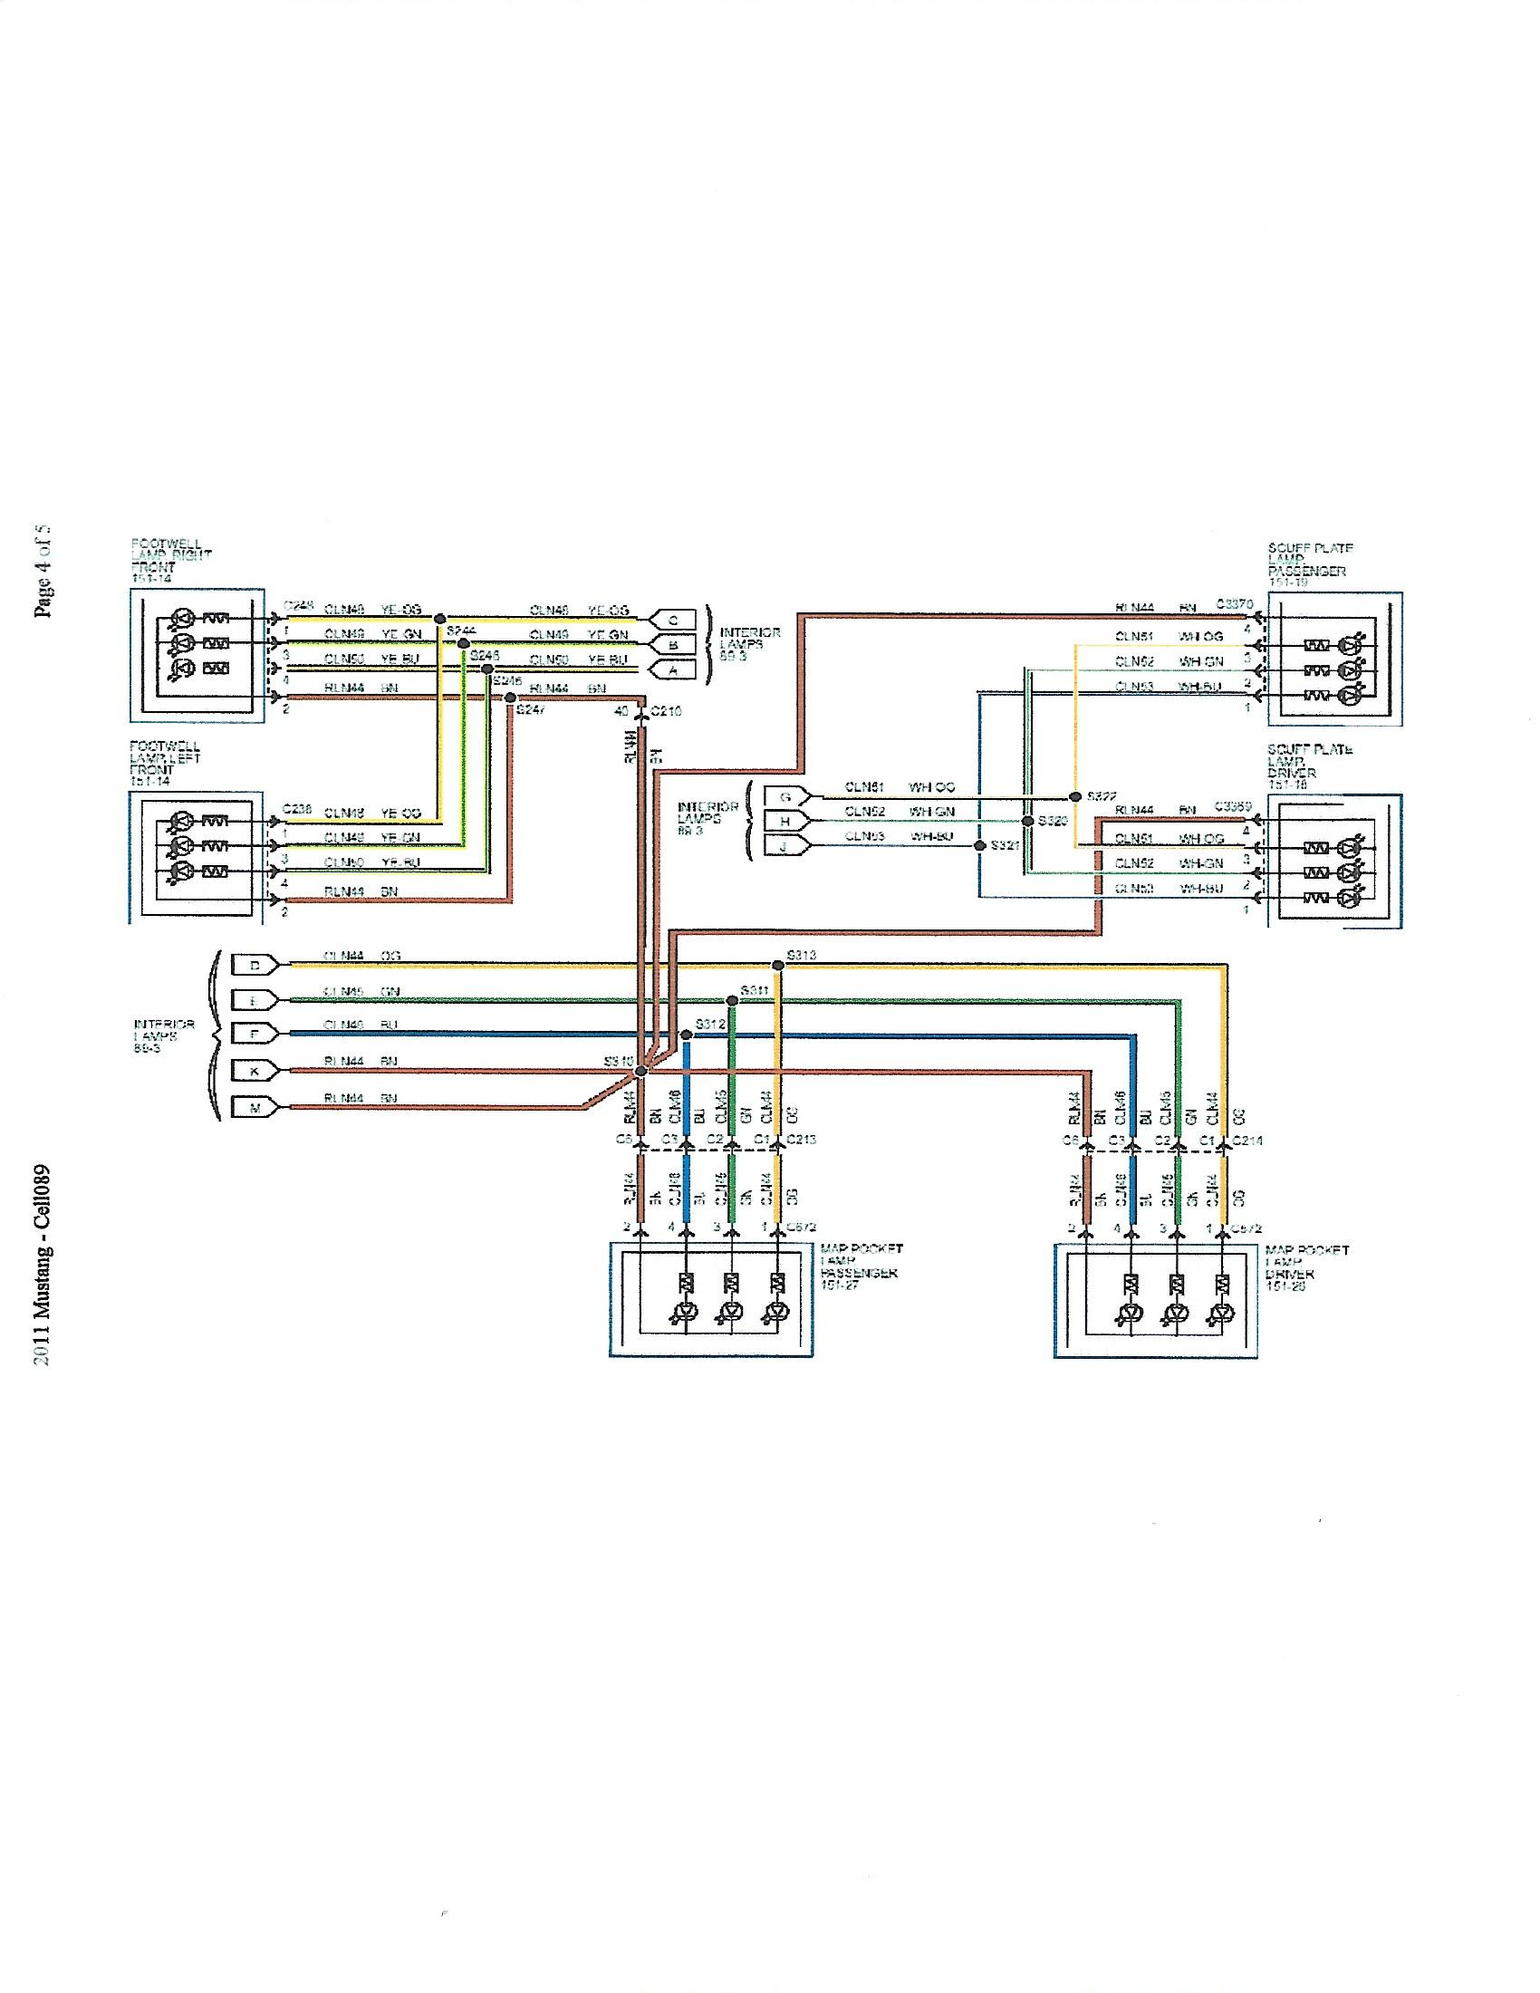 08 Mustang wiring diagram - The Mustang Source - Ford Mustang Forums